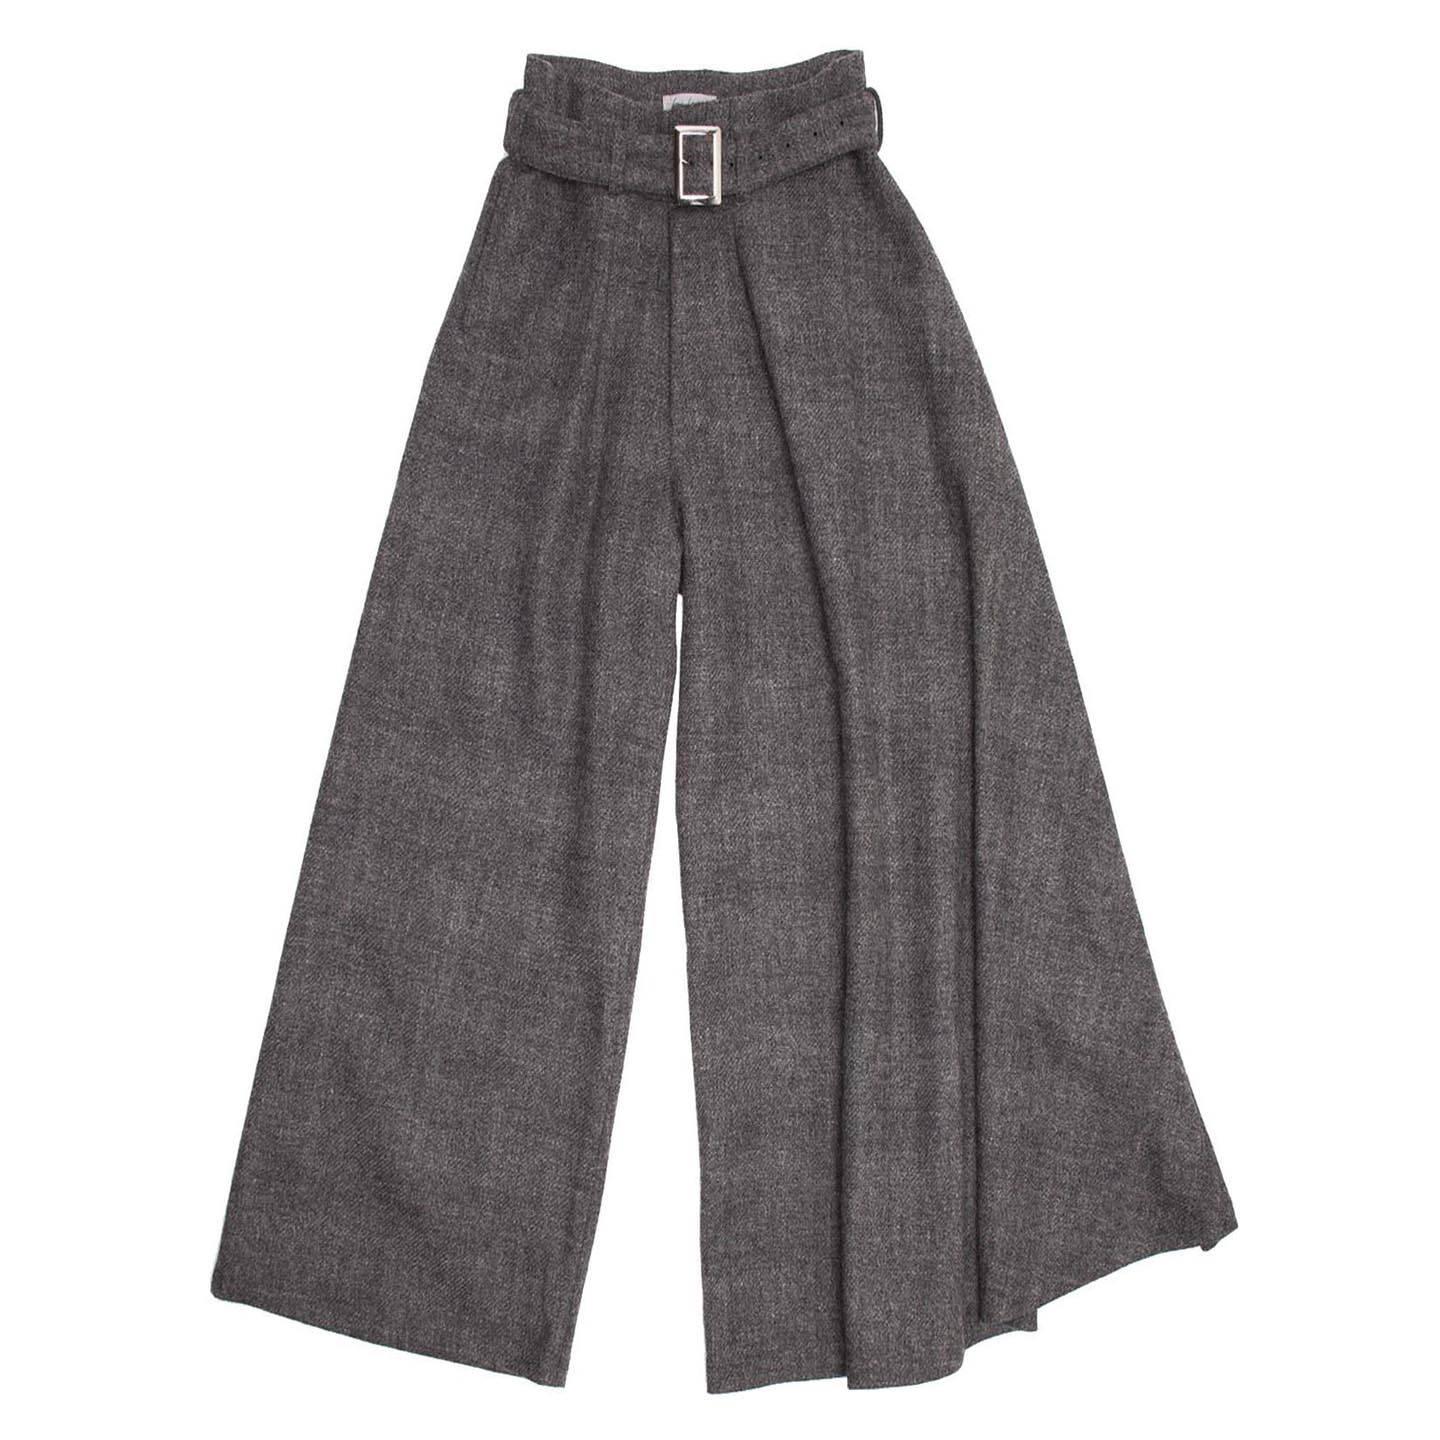 Yohji Yamamoto grey heathered wool palazzo pants with self buckled belt. Slit pockets at front side. Width of wearer's left leg is wider and drapes over front. High waisted with 2 pleats at front and a fly zipper opening.

Size  3 

Condition 